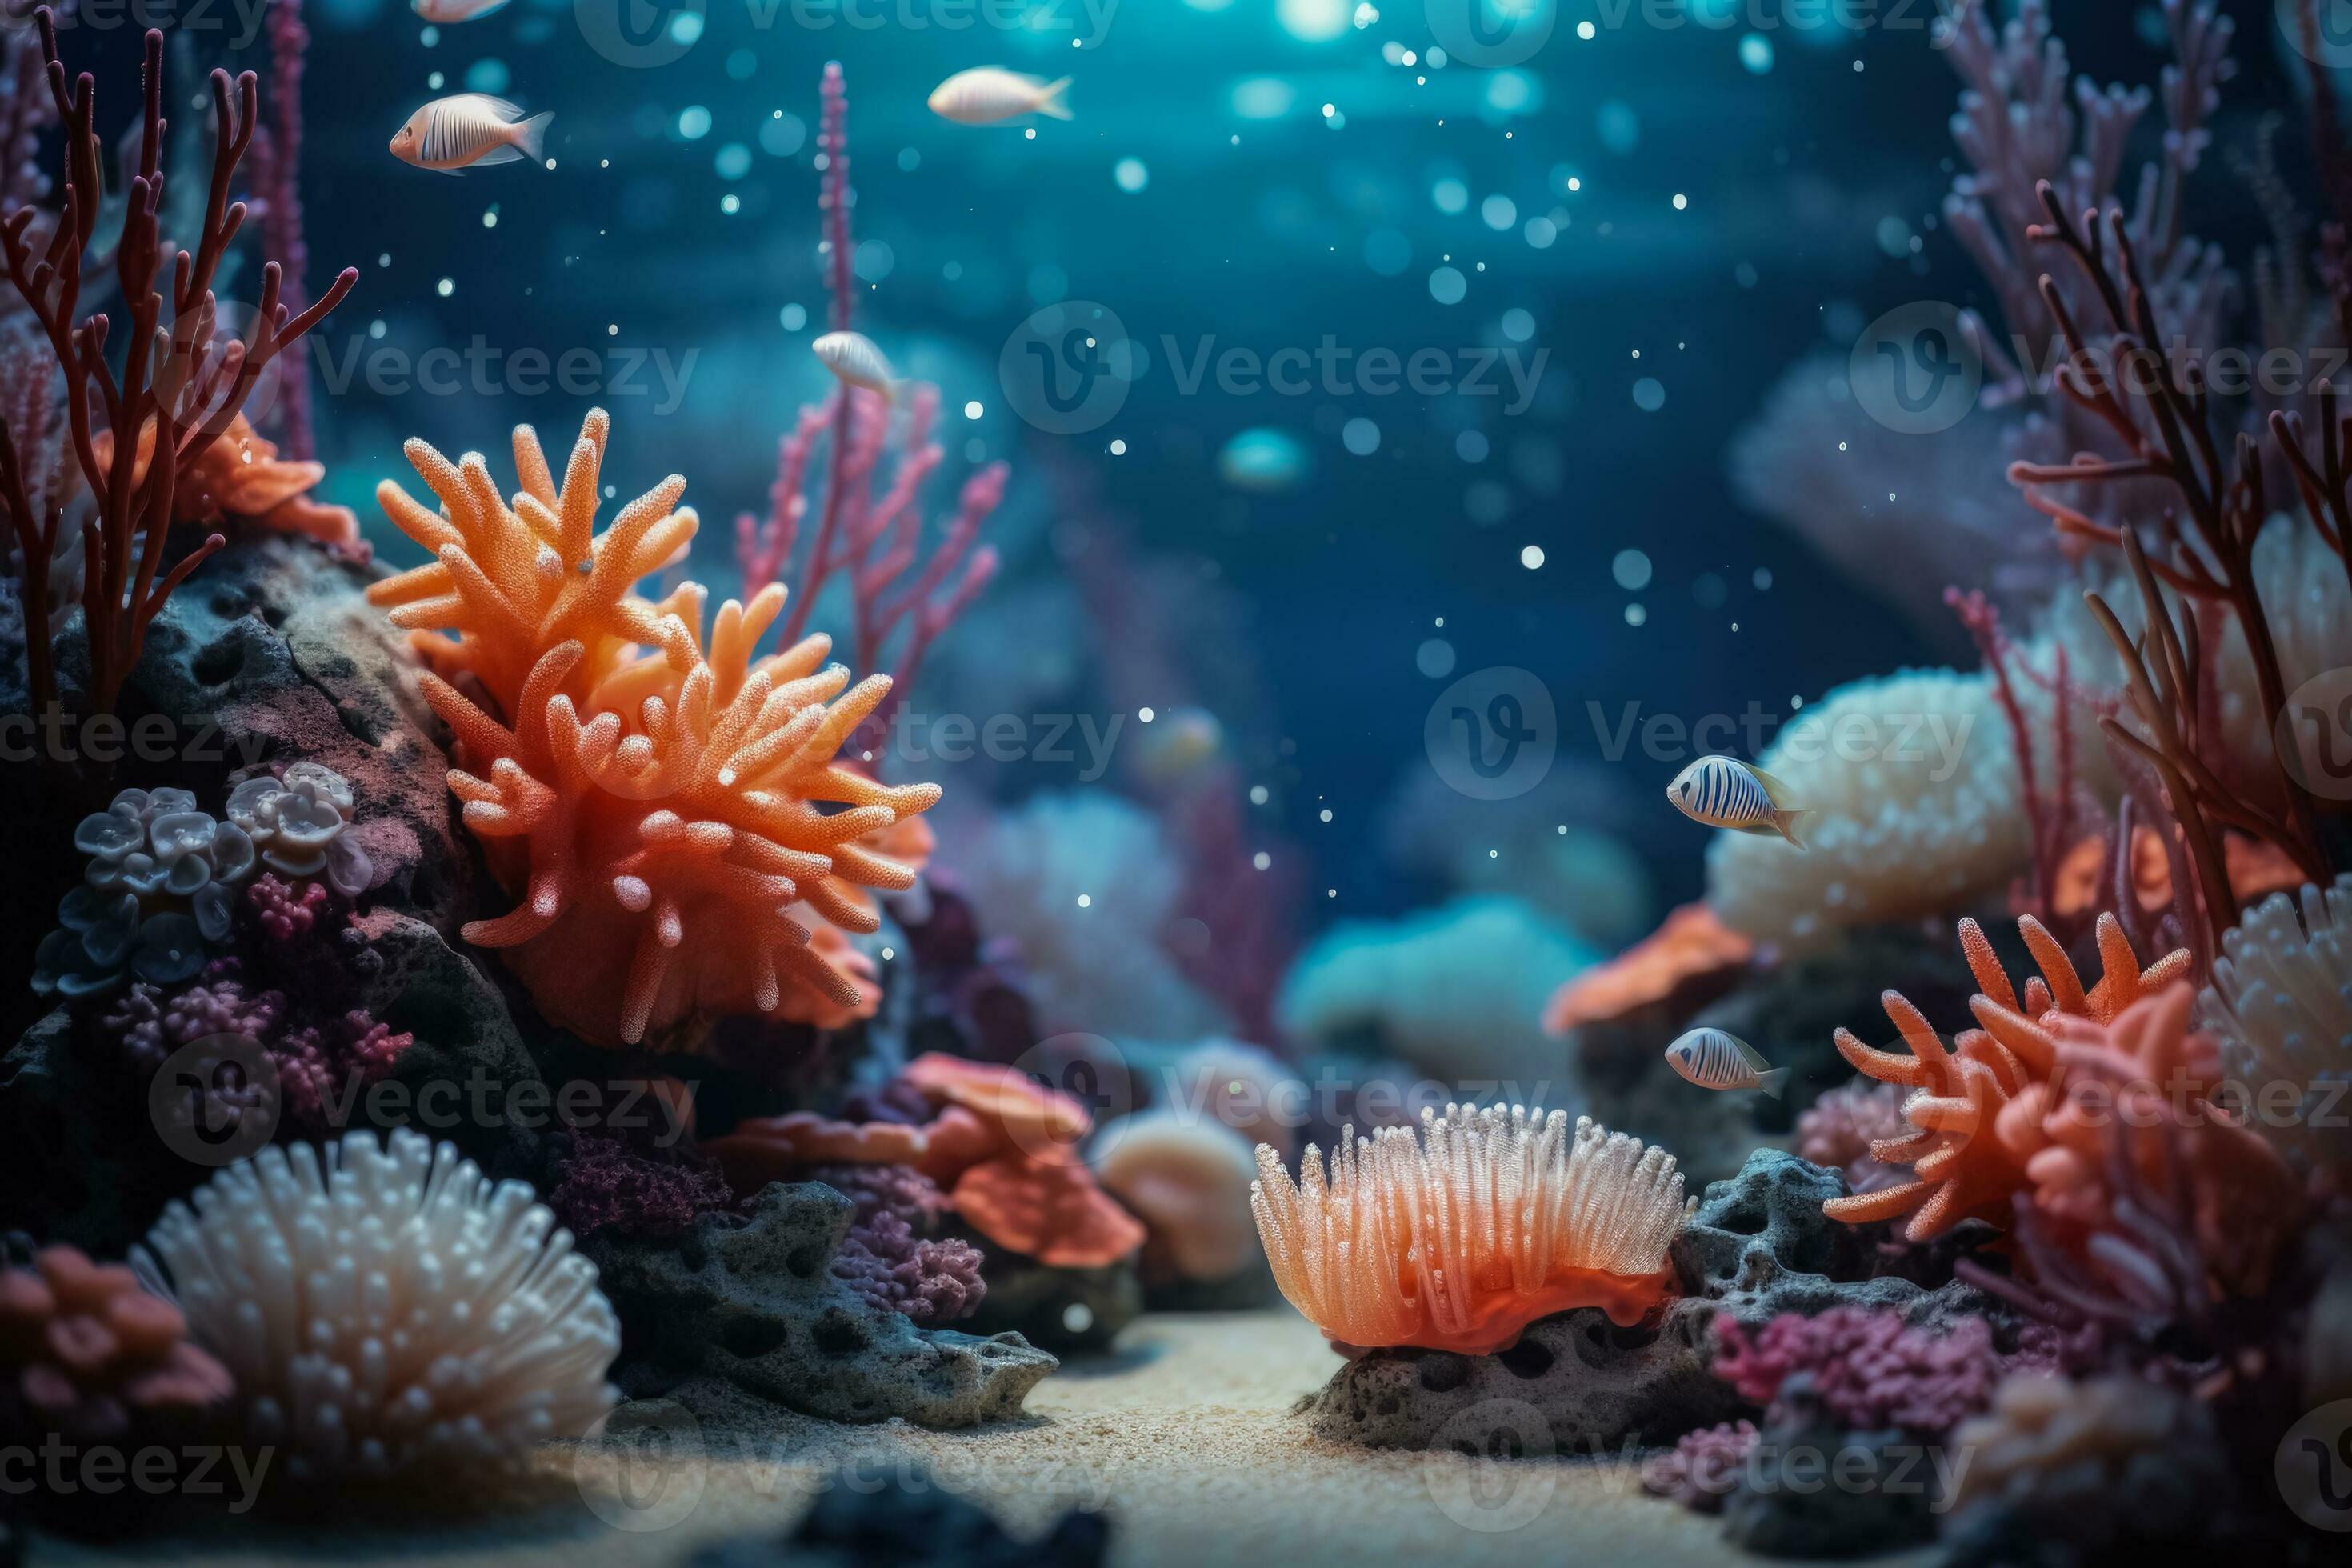 https://static.vecteezy.com/system/resources/previews/031/728/413/large_2x/underwater-coral-reef-festooned-with-sparkling-decorations-for-new-years-celebration-photo.jpg